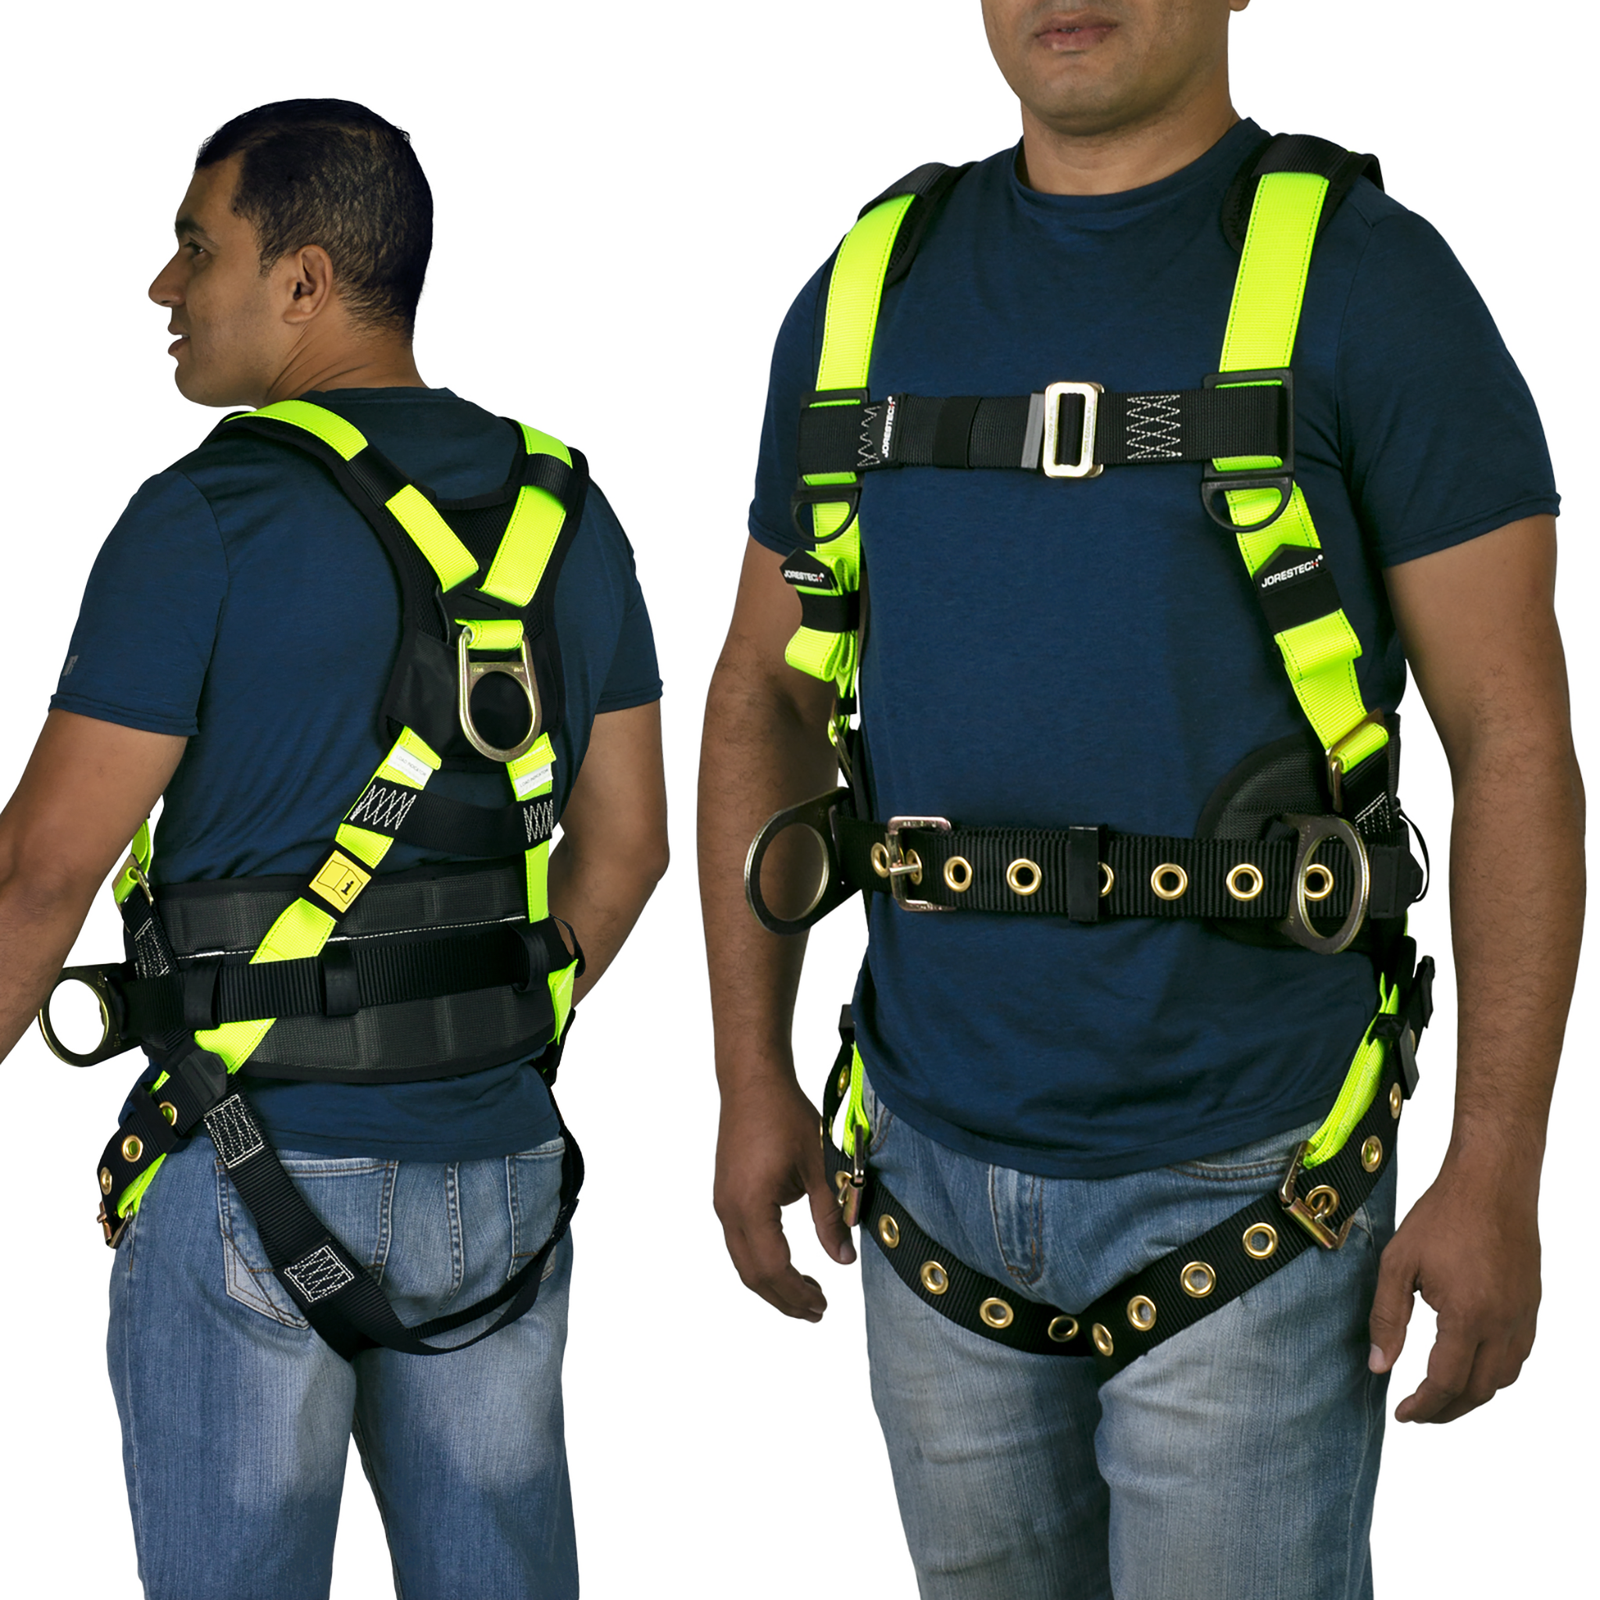 Front and back view of a person wearing the hi-vis yellow and black 3D fall protection safety body JORESTECH harness with grommets and back supports padding